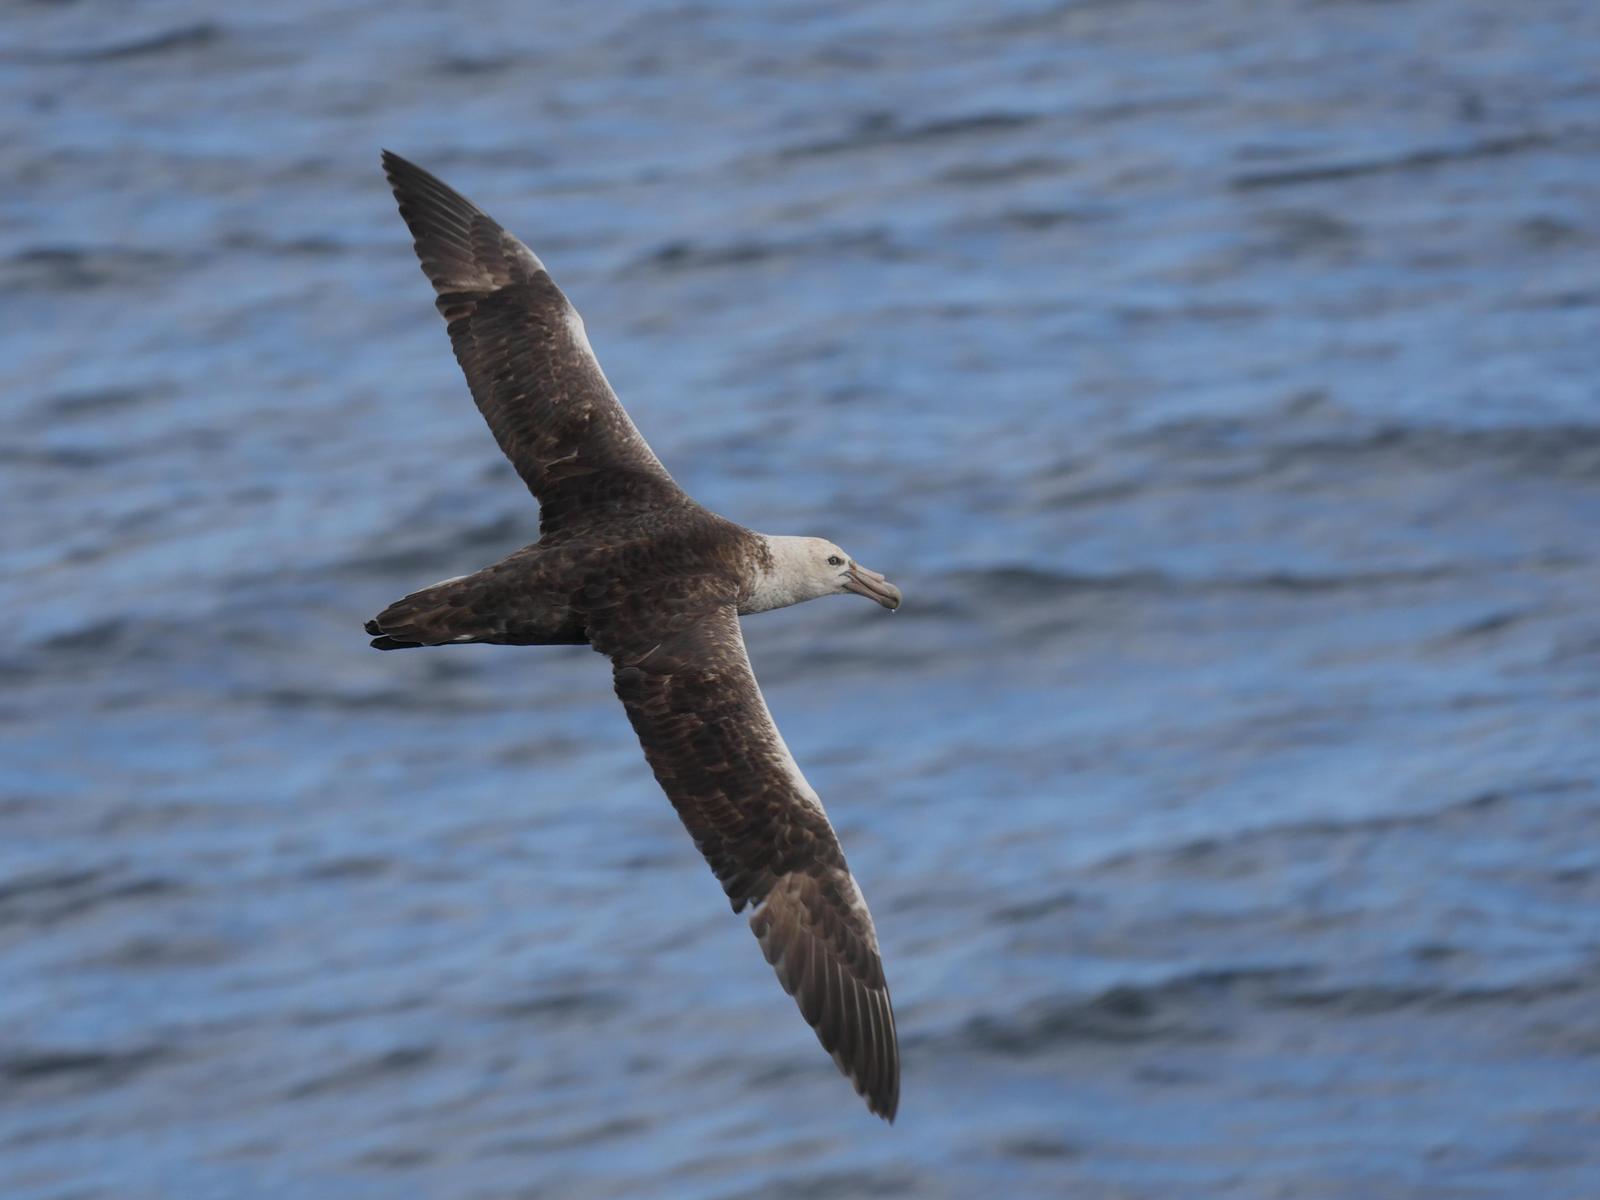 Southern Giant-Petrel Photo by Peter Lowe